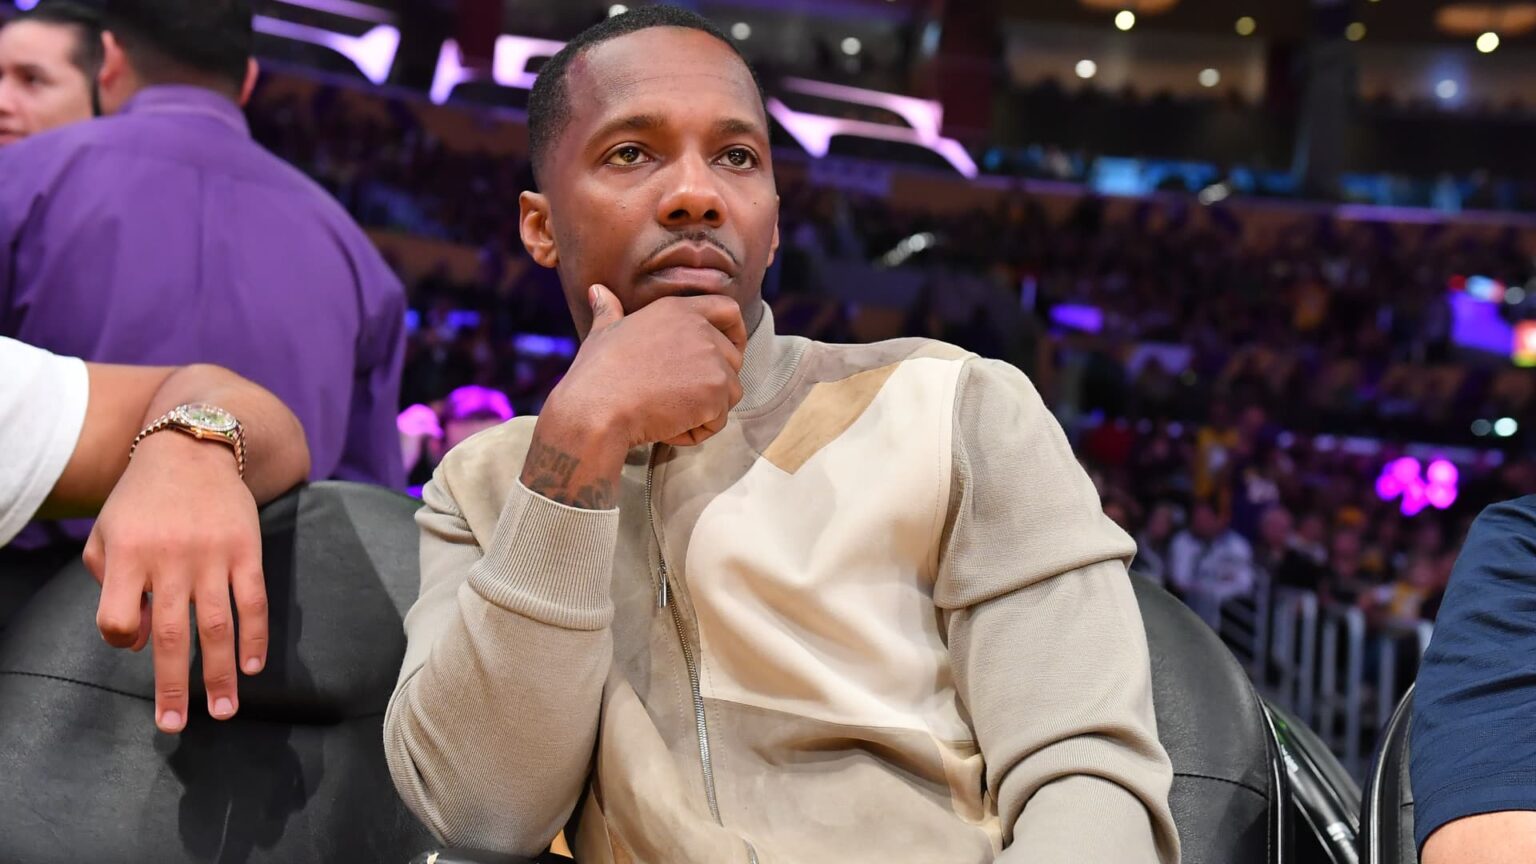 Robinhood partners with Klutch and Rich Paul, LeBron James' agent